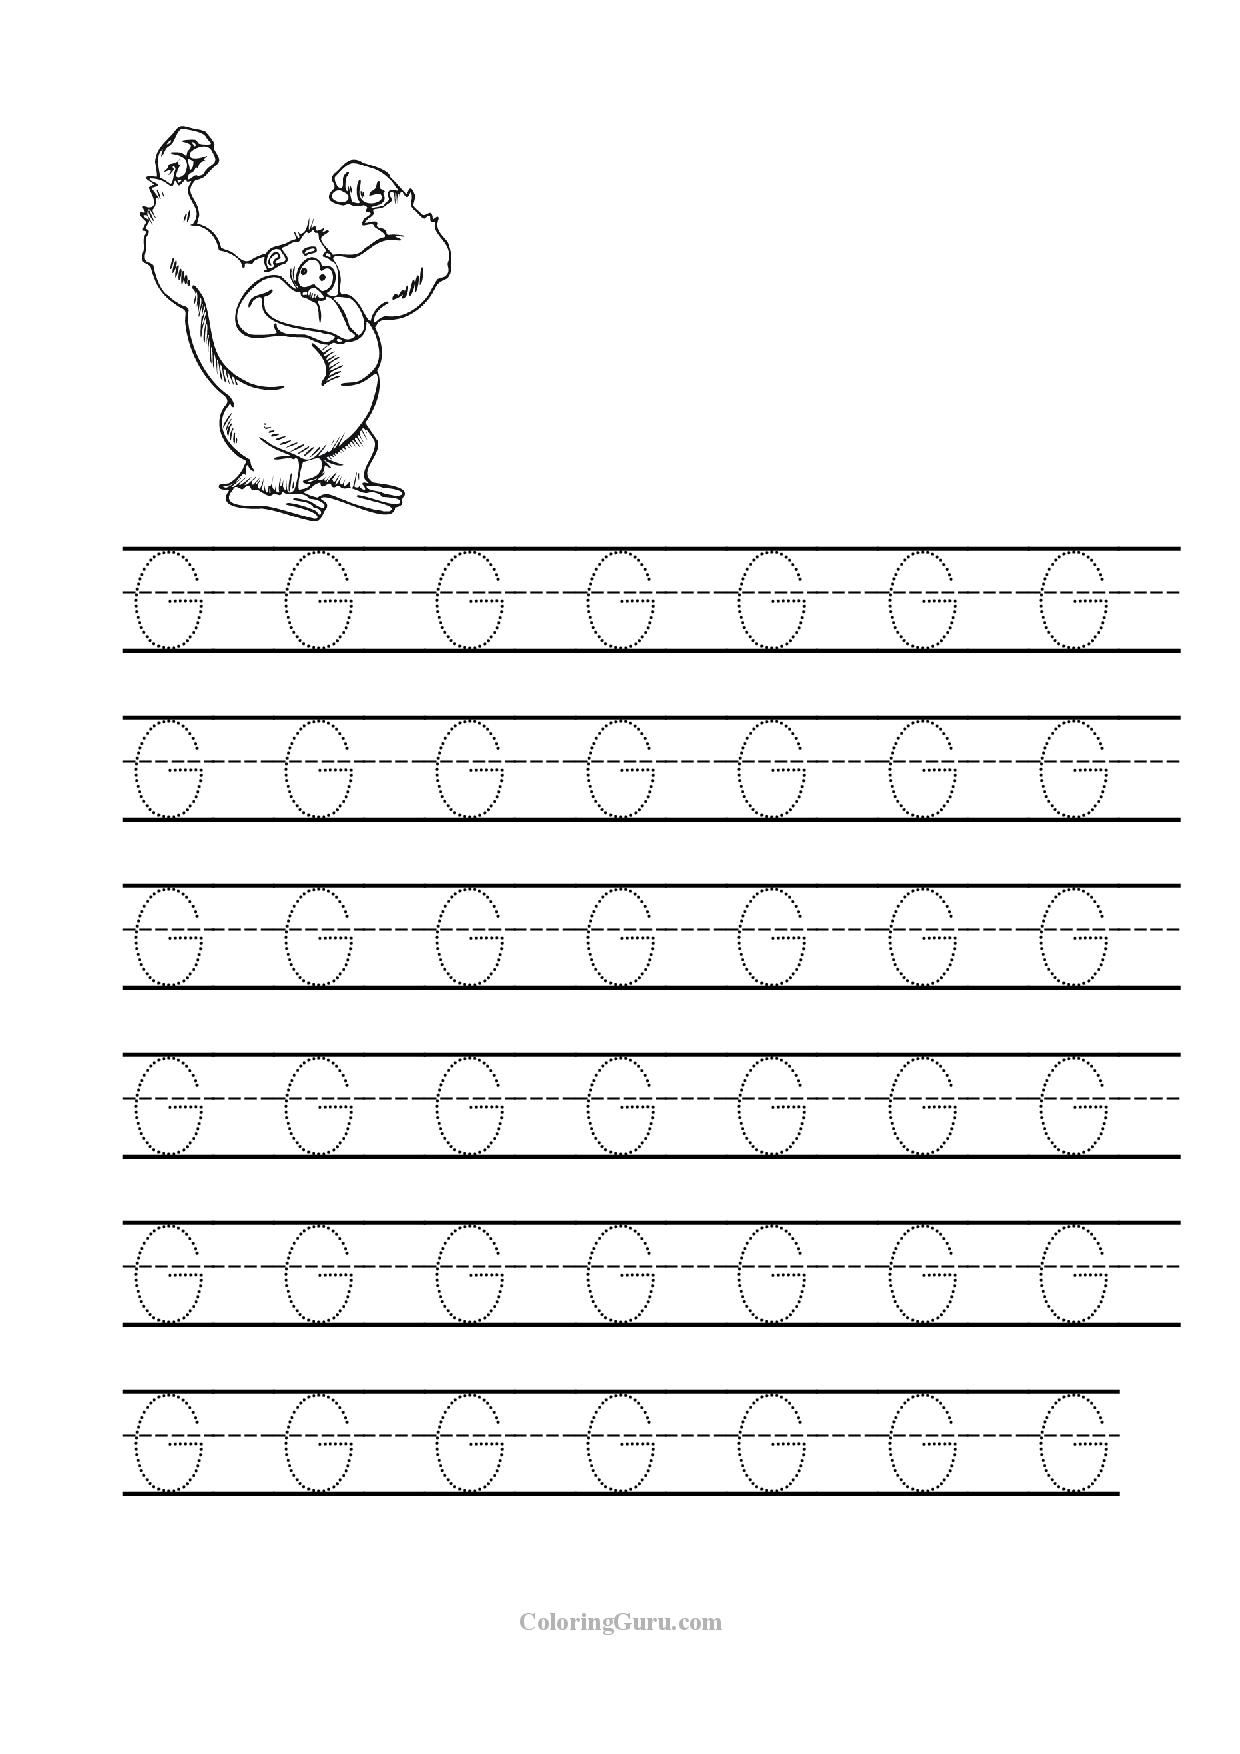 Free Printable Tracing Letter G Worksheets For Preschool within Tracing Letter G Worksheets